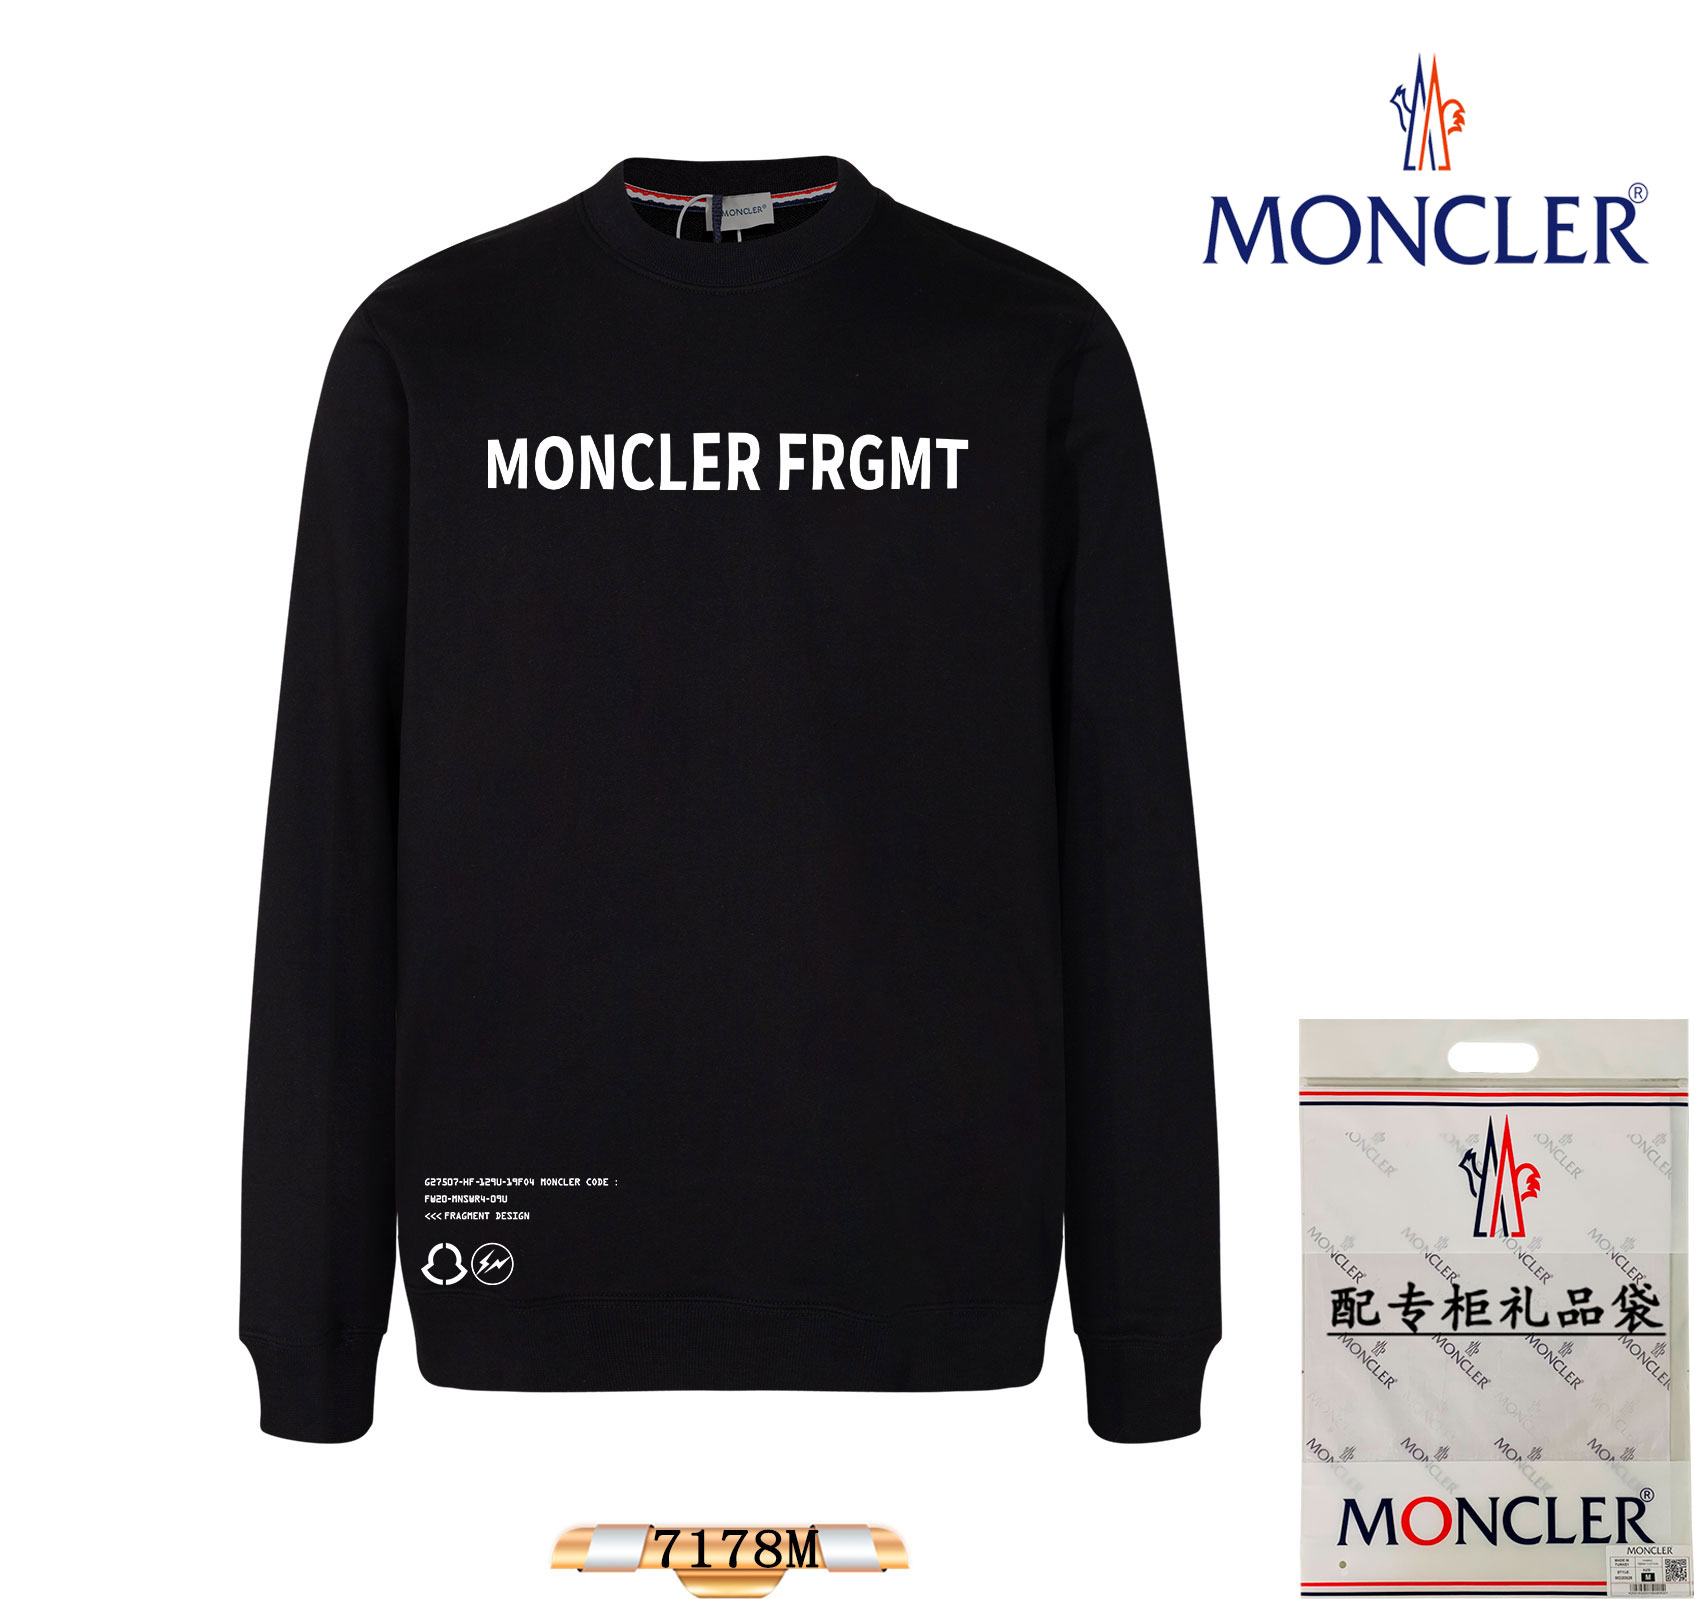 Moncler Clothing Sweatshirts Apricot Color Black Silver White Unisex Cotton Spring Collection